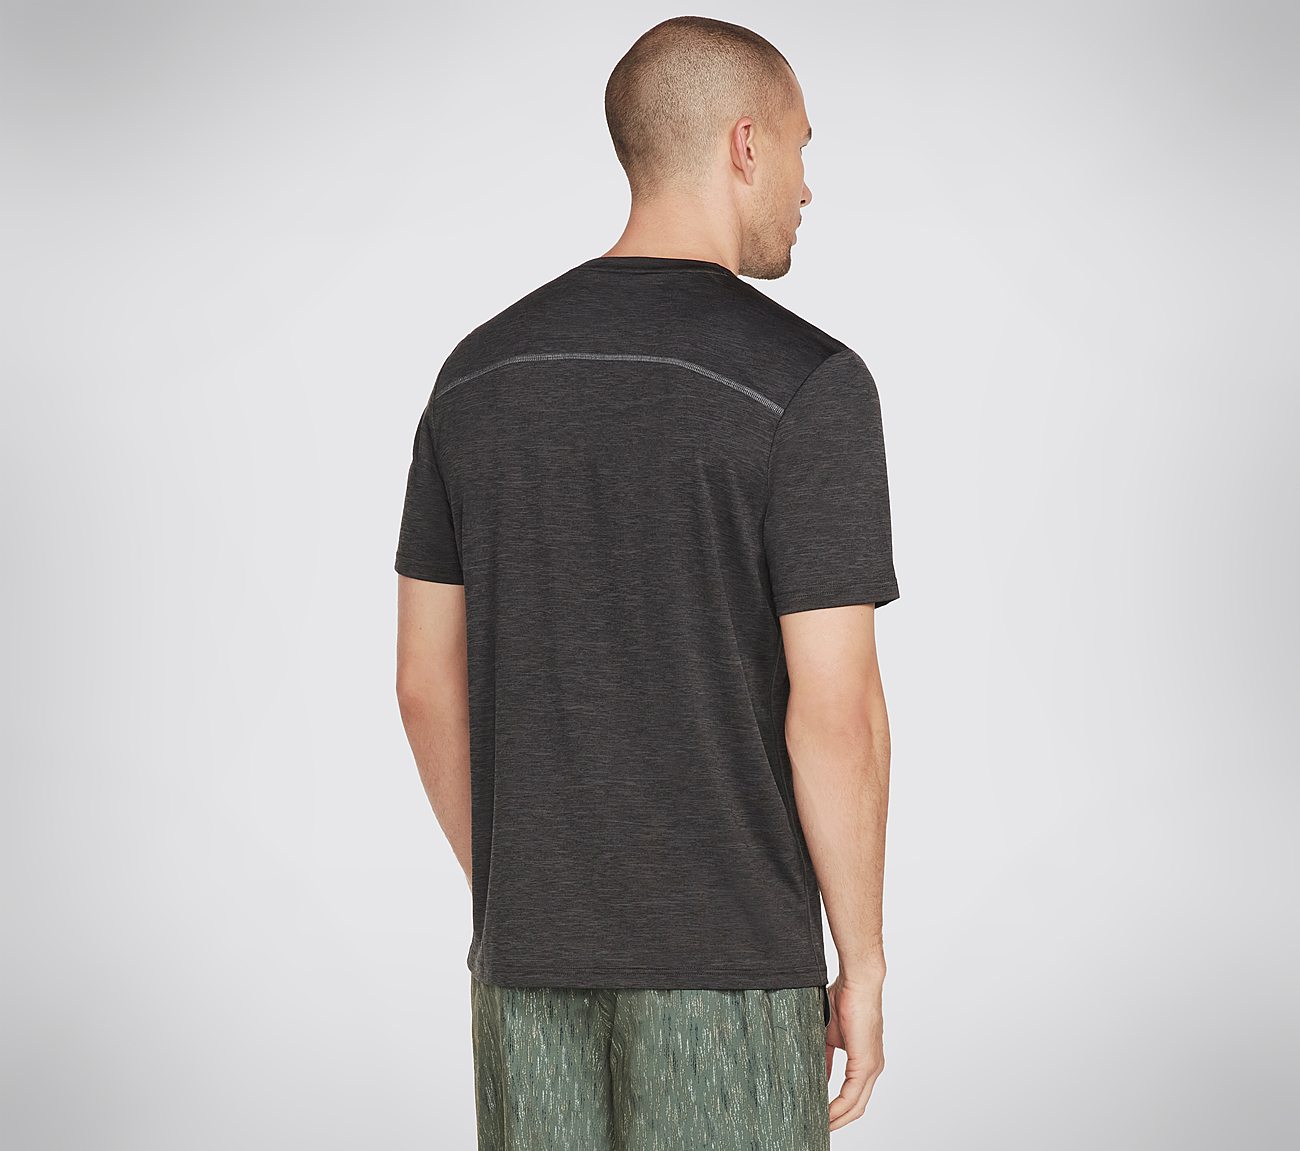  ON THE ROAD TEE, BLACK/CHARCOAL Apparel Top View